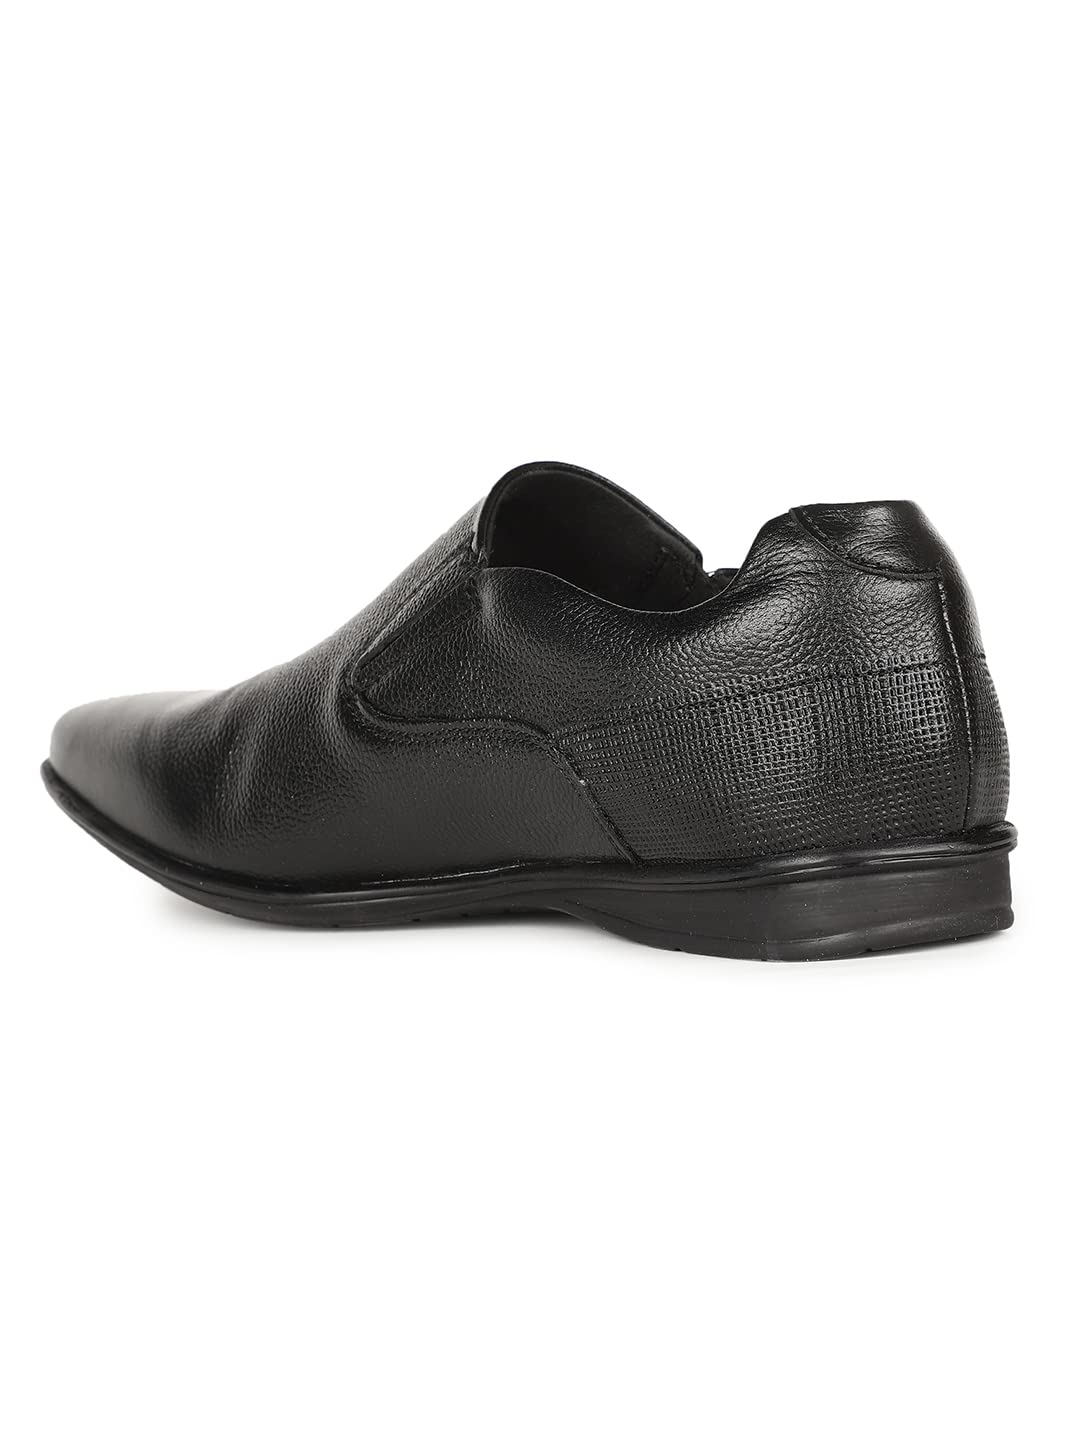 Hush Puppies MenCORSO Loafer Shoes UK 9 Color Black